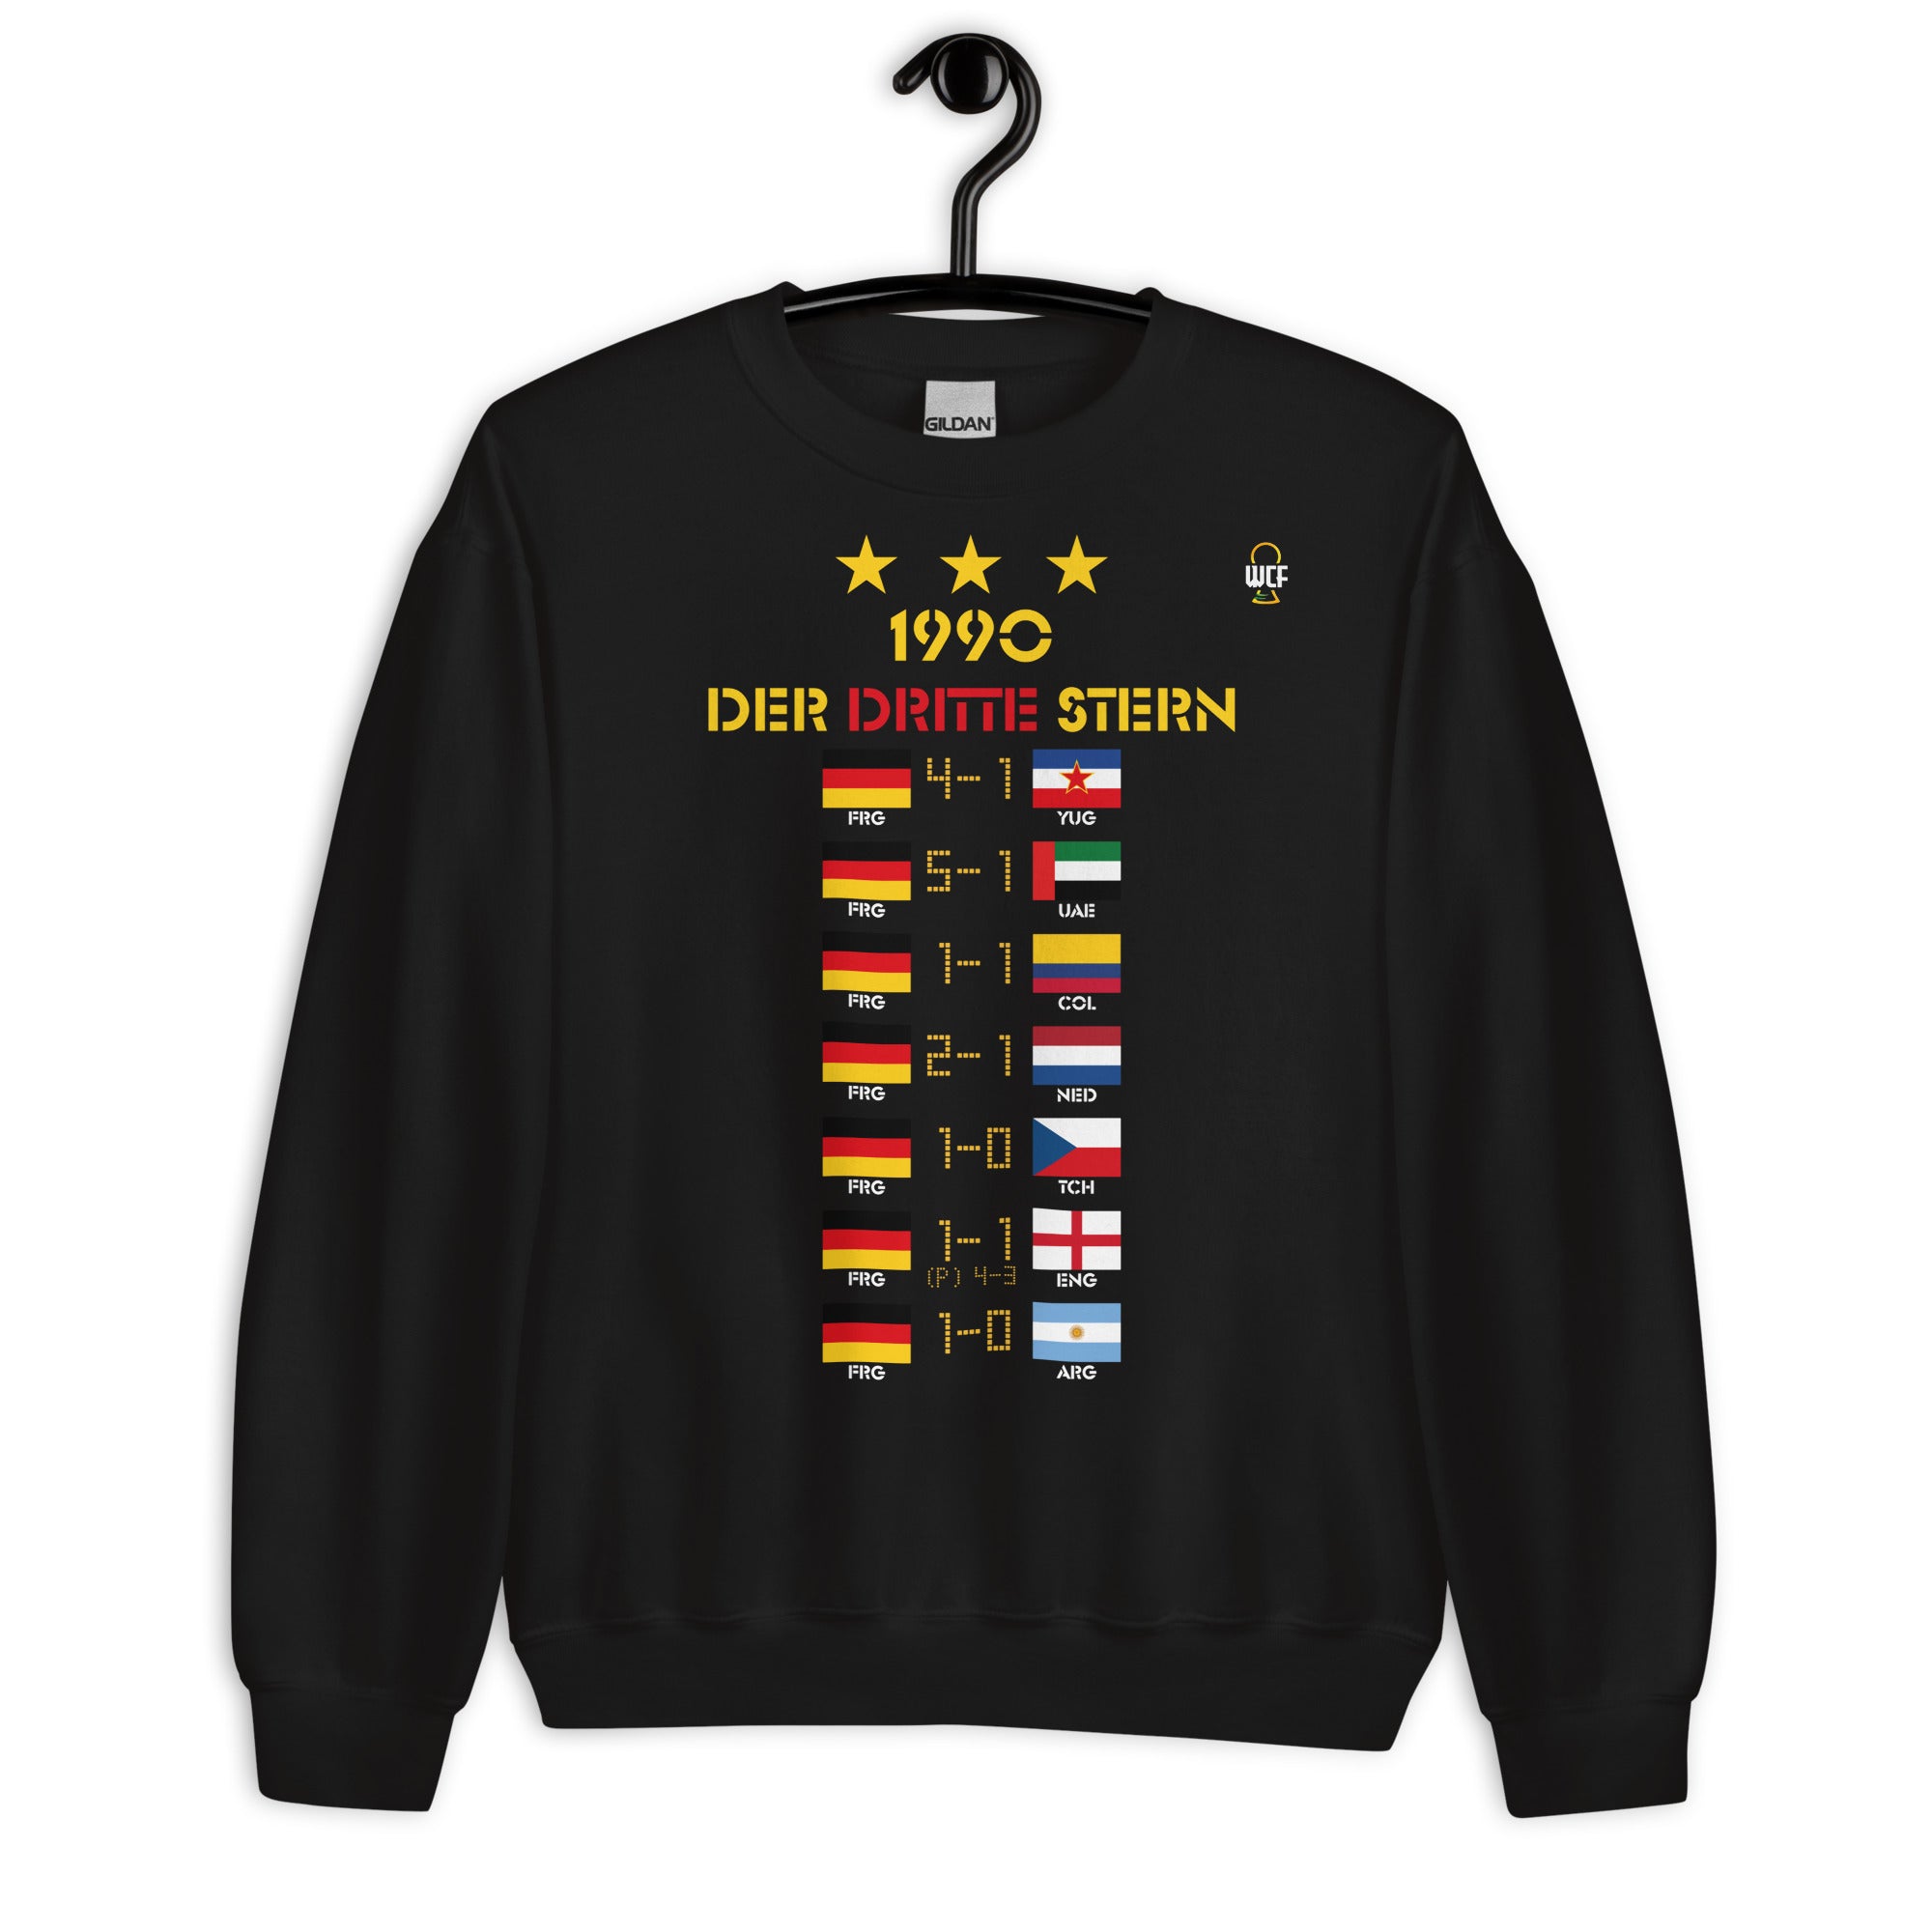 World Cup 1990 Sweatshirt - Road to the Glory - WEST GERMANY